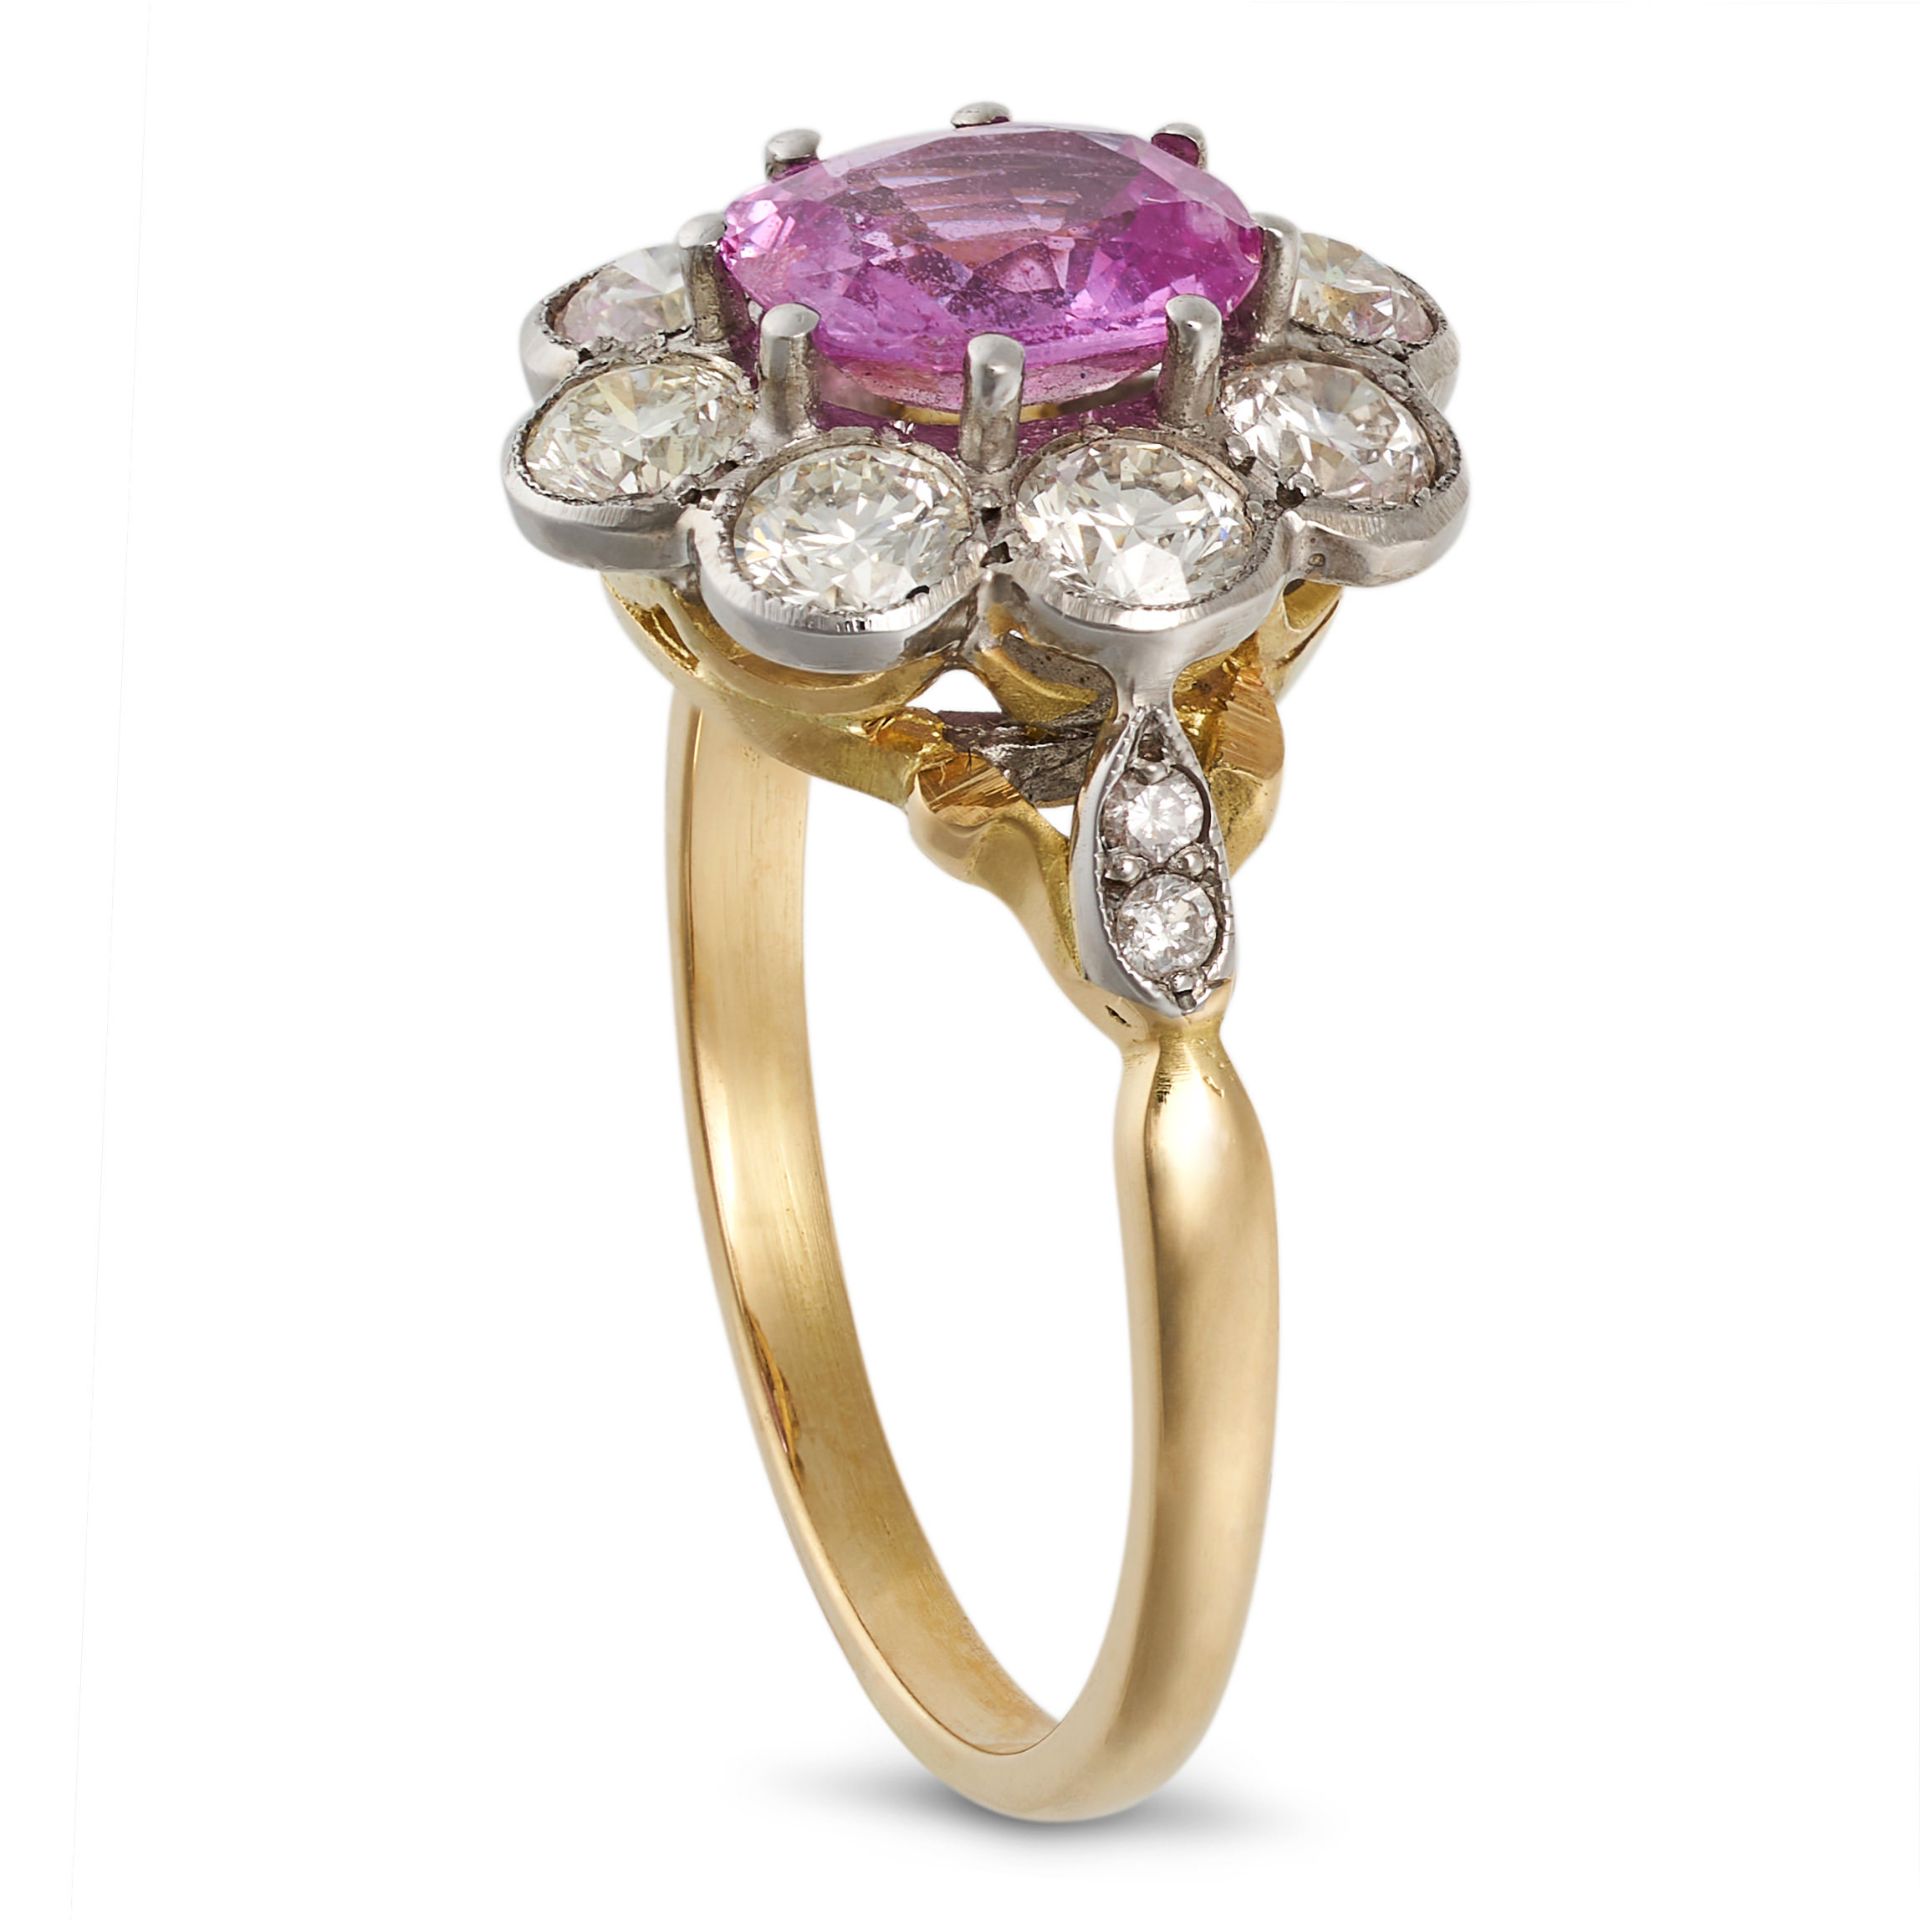 A PINK SAPPHIRE AND DIAMOND CLUSTER RING in yellow gold, set with a cushion cut pink sapphire of ... - Image 2 of 2